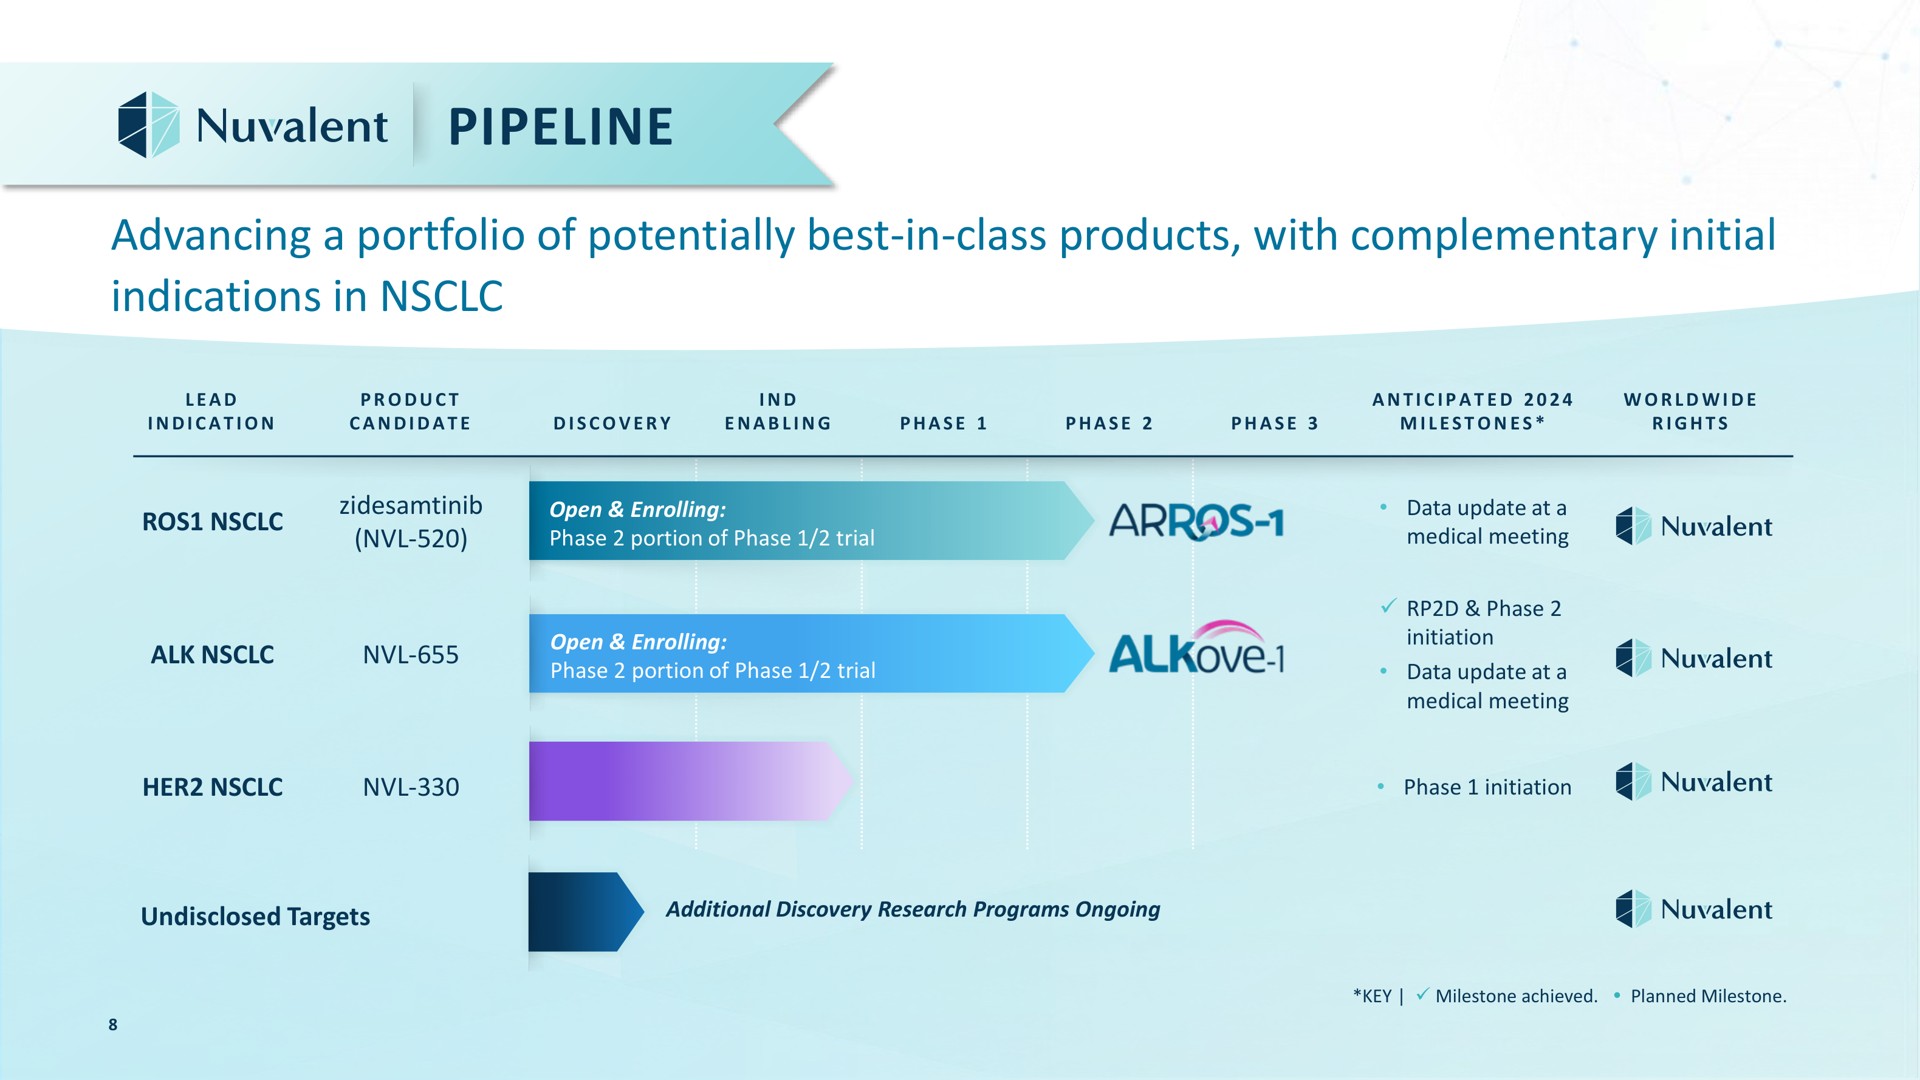 pipeline advancing a portfolio of potentially best in class products with complementary initial indications in lead indication product candidate discovery enabling phase phase phase anticipated milestones rights open enrolling era seer data update medical meeting open enrolling phase portion phase trial her phase initiation data update medical meeting phase initiation undisclosed targets additional discovery research programs ongoing key milestone achieved planned milestone | Nuvalent